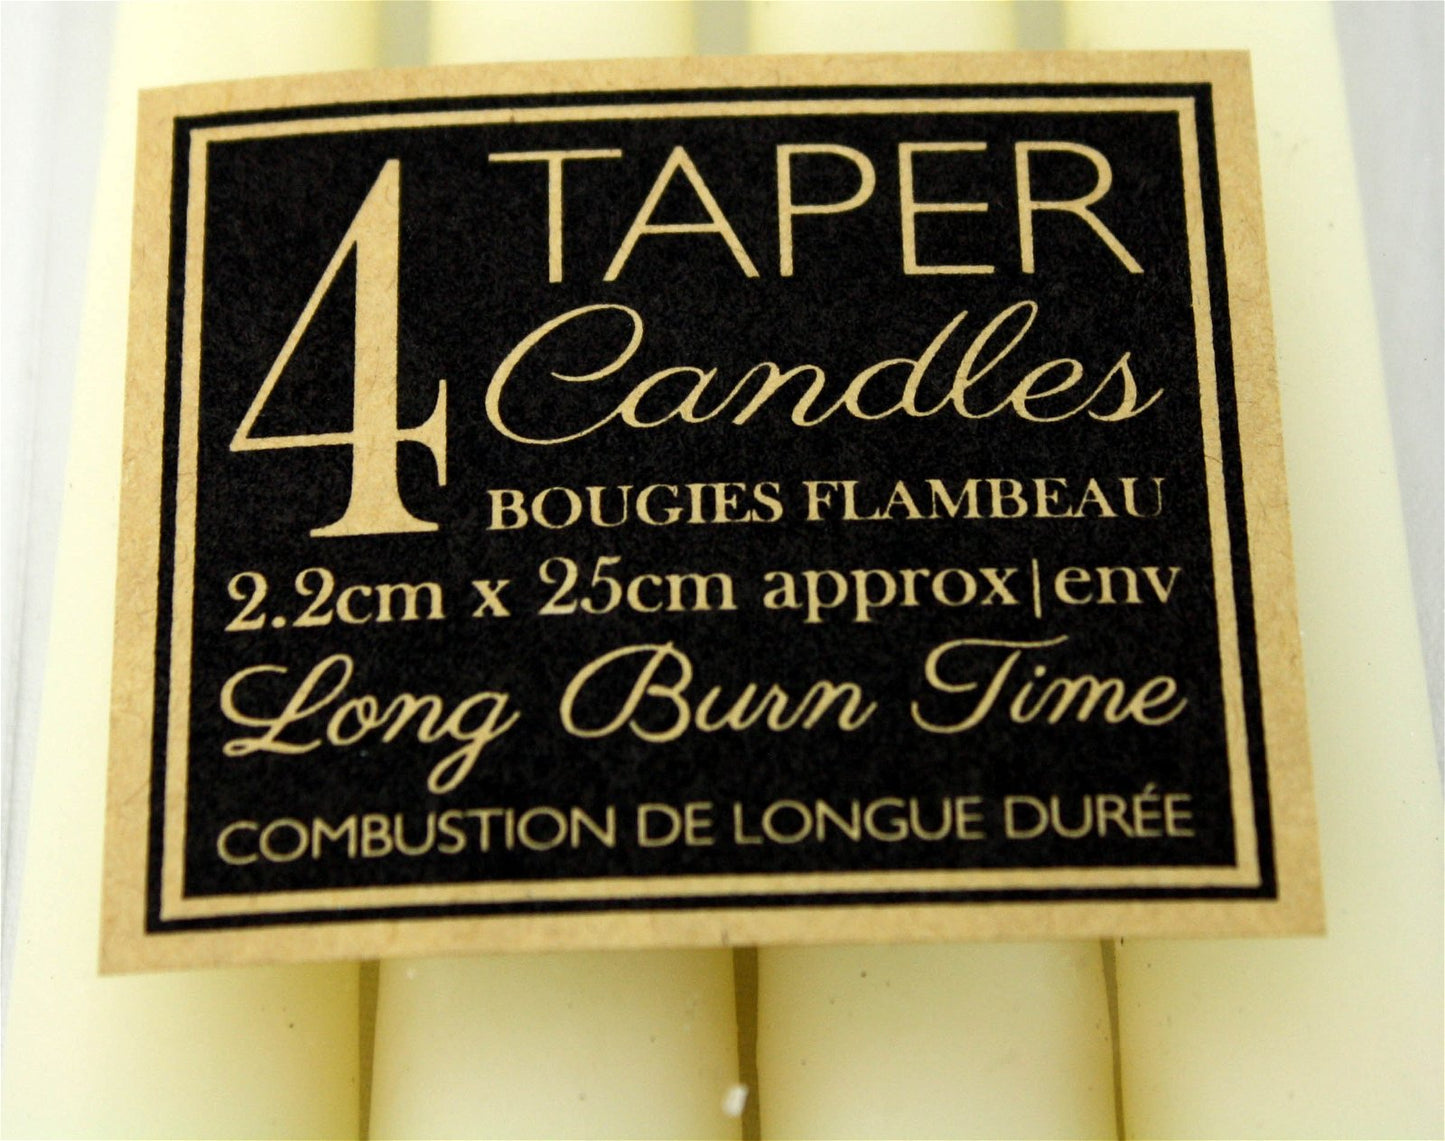 Set Of 4 Ivory Taper Candles